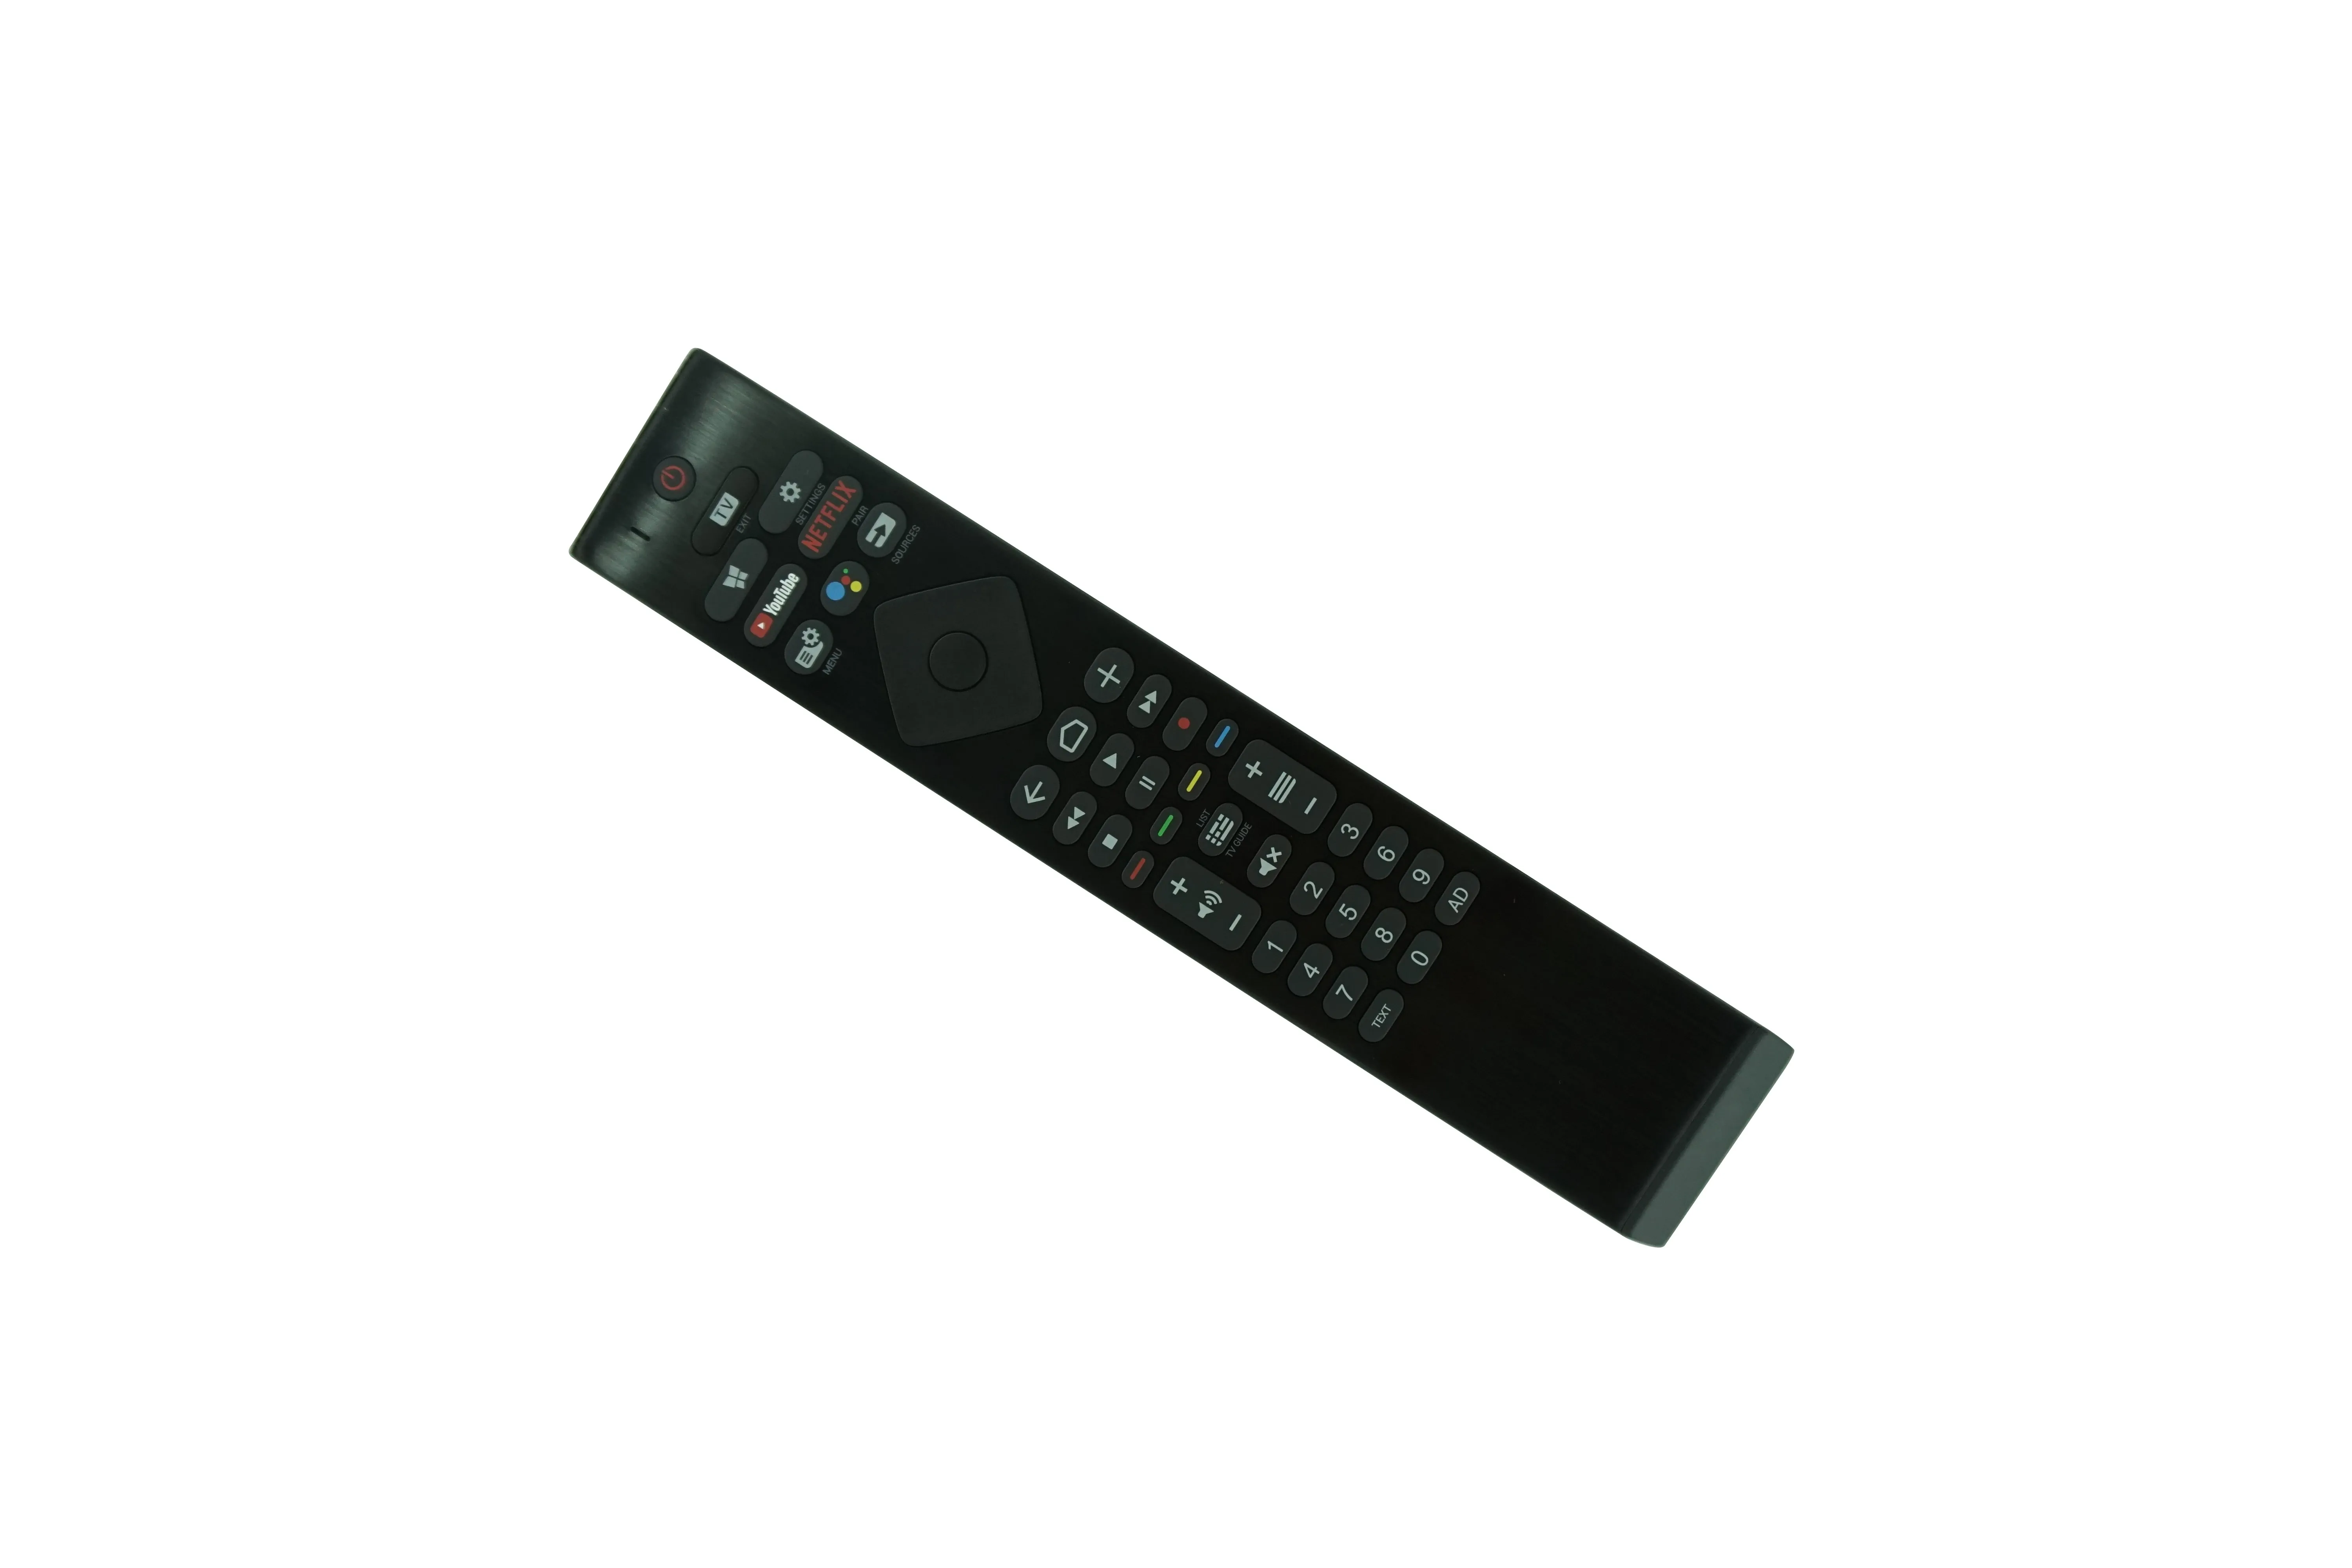 staff Pathetic Scholar Remote Control For Philips 43pus7304/12 55pus7504/12 Ykf456-a001 75pus7354/ 12 4k Uhd Led Android Tv With Google Assistant - Remote Control - AliExpress